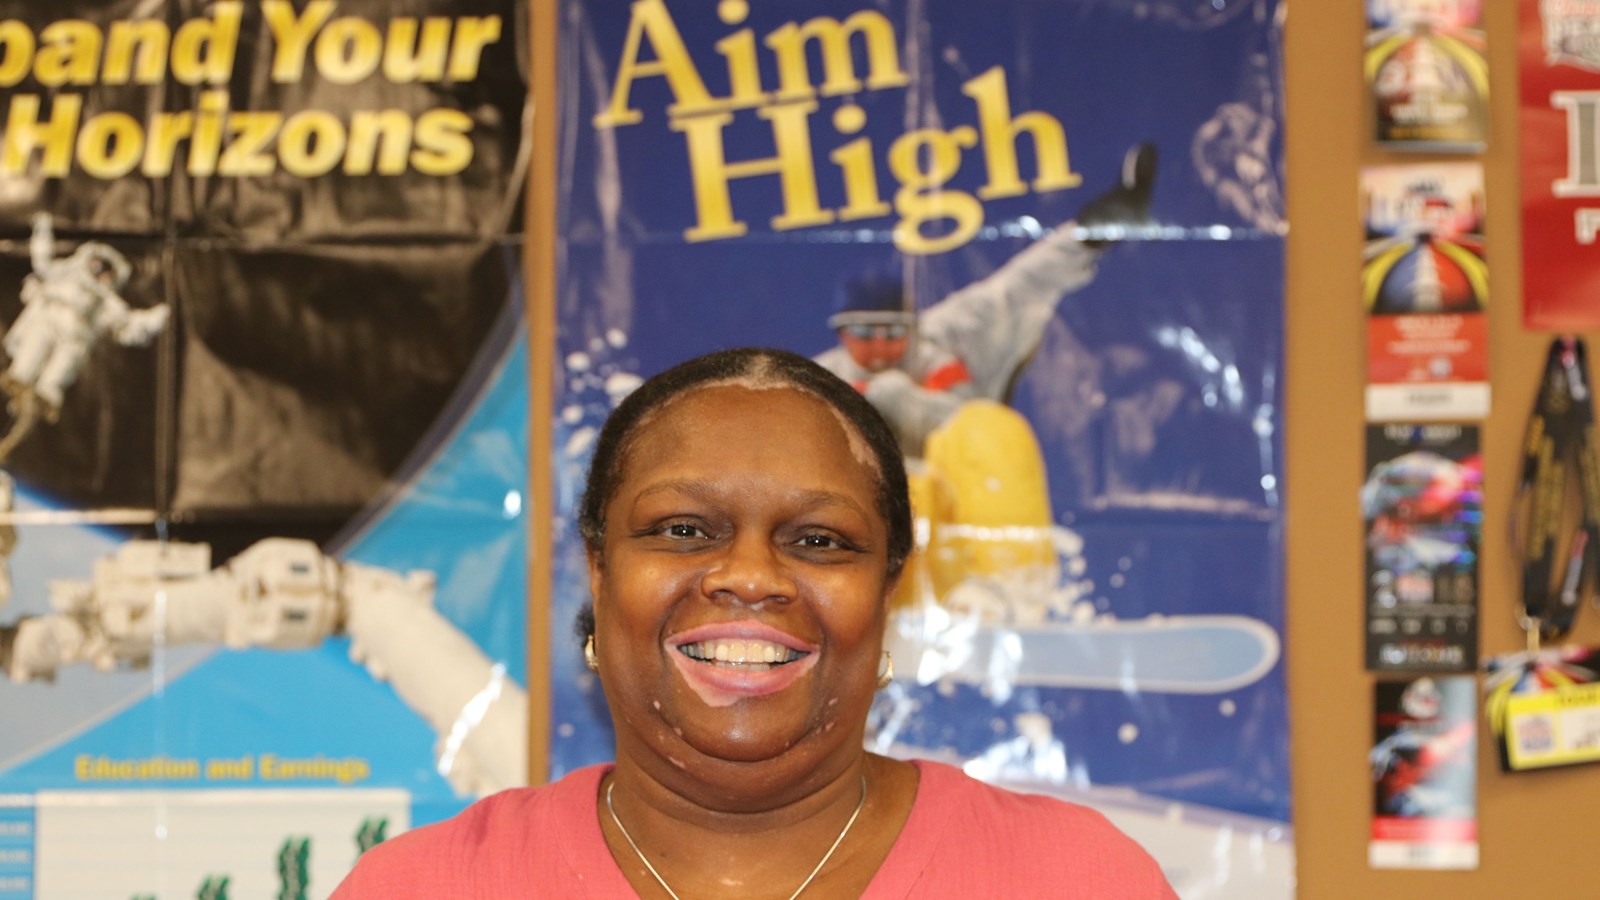 Jacqueline Valentine has served students at South Cobb High School for more than two decades